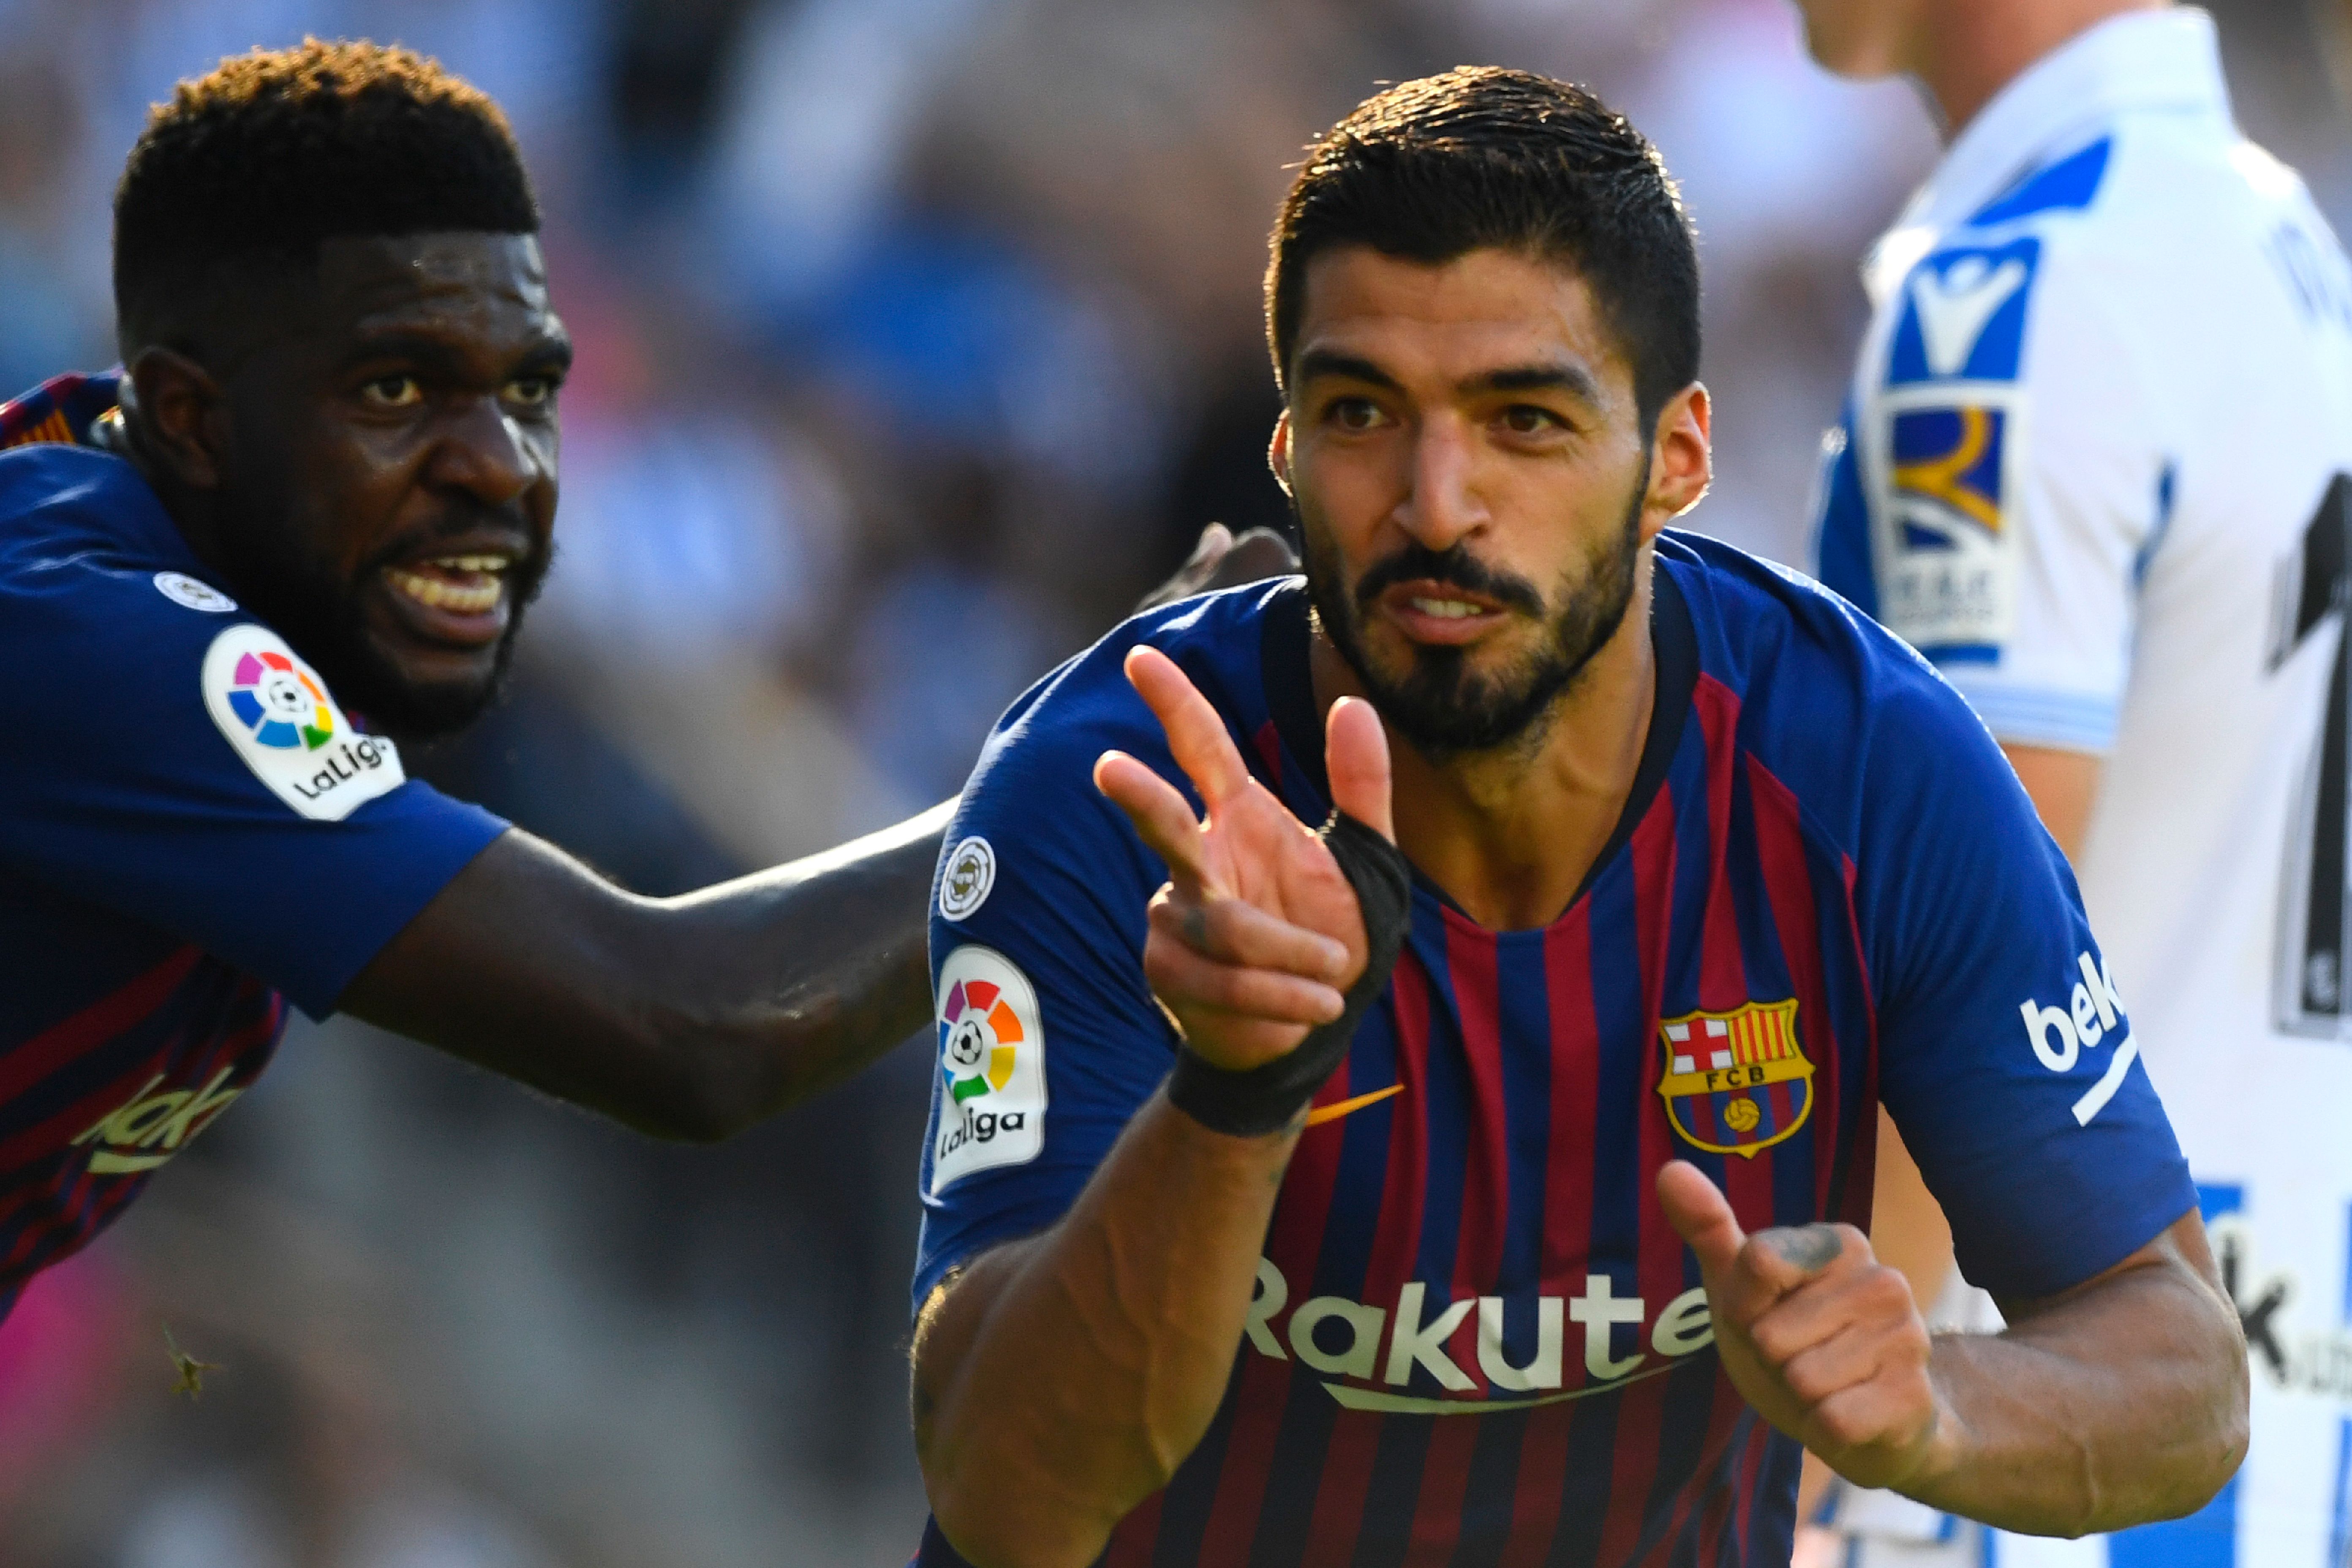 Barcelona's Uruguayan forward Luis Suarez (R) celebrates with Barcelona's French defender Samuel Umtiti after scoring a goal during the Spanish league football match between Real Sociedad and FC Barcelona at the Anoeta stadium in San Sebastian on September 15, 2018. (Photo by GABRIEL BOUYS / AFP)        (Photo credit should read GABRIEL BOUYS/AFP/Getty Images)